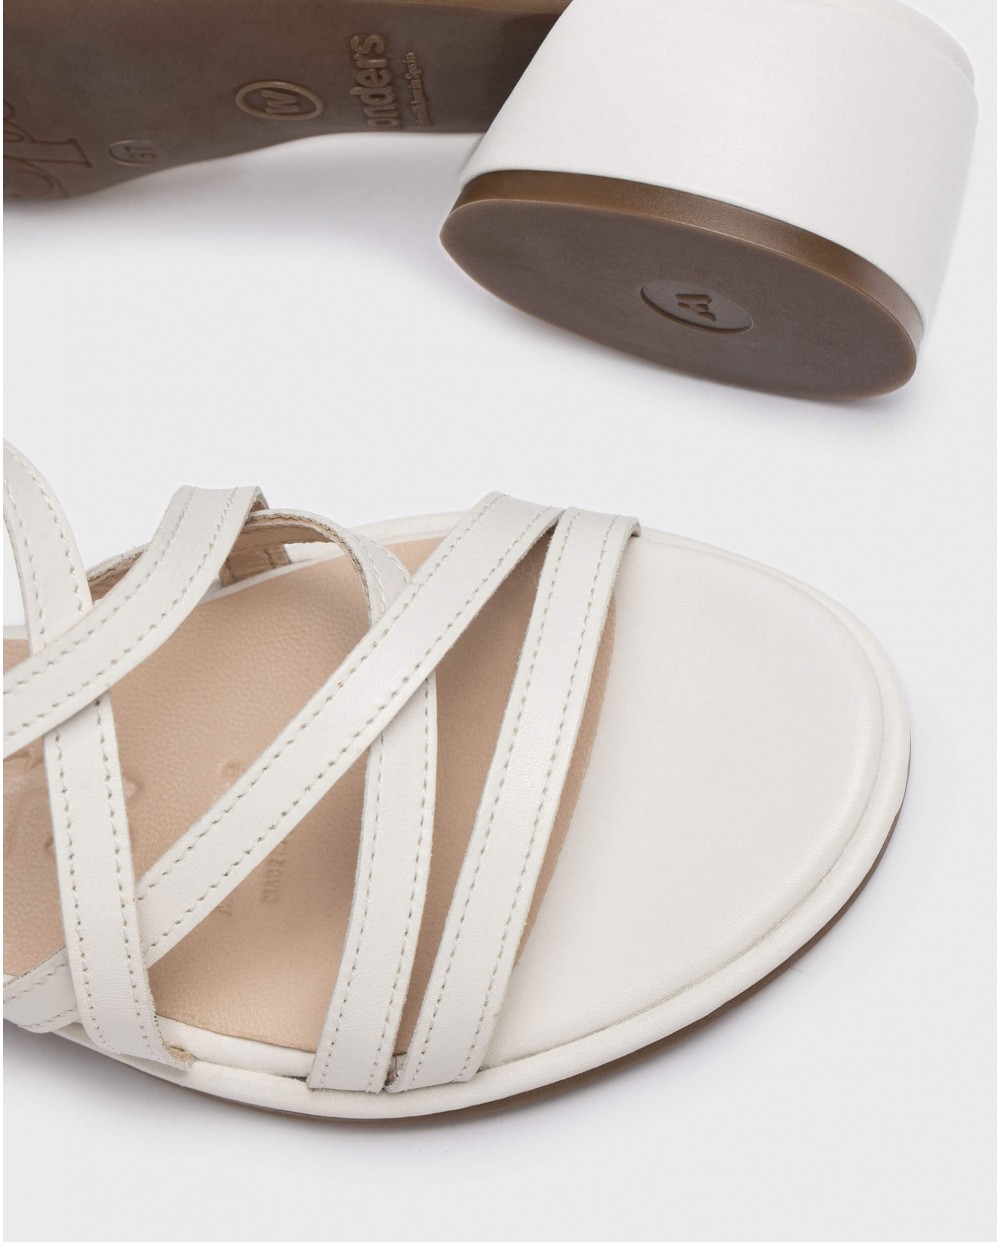 Wonders-Heels-Flat sandal with leather straps